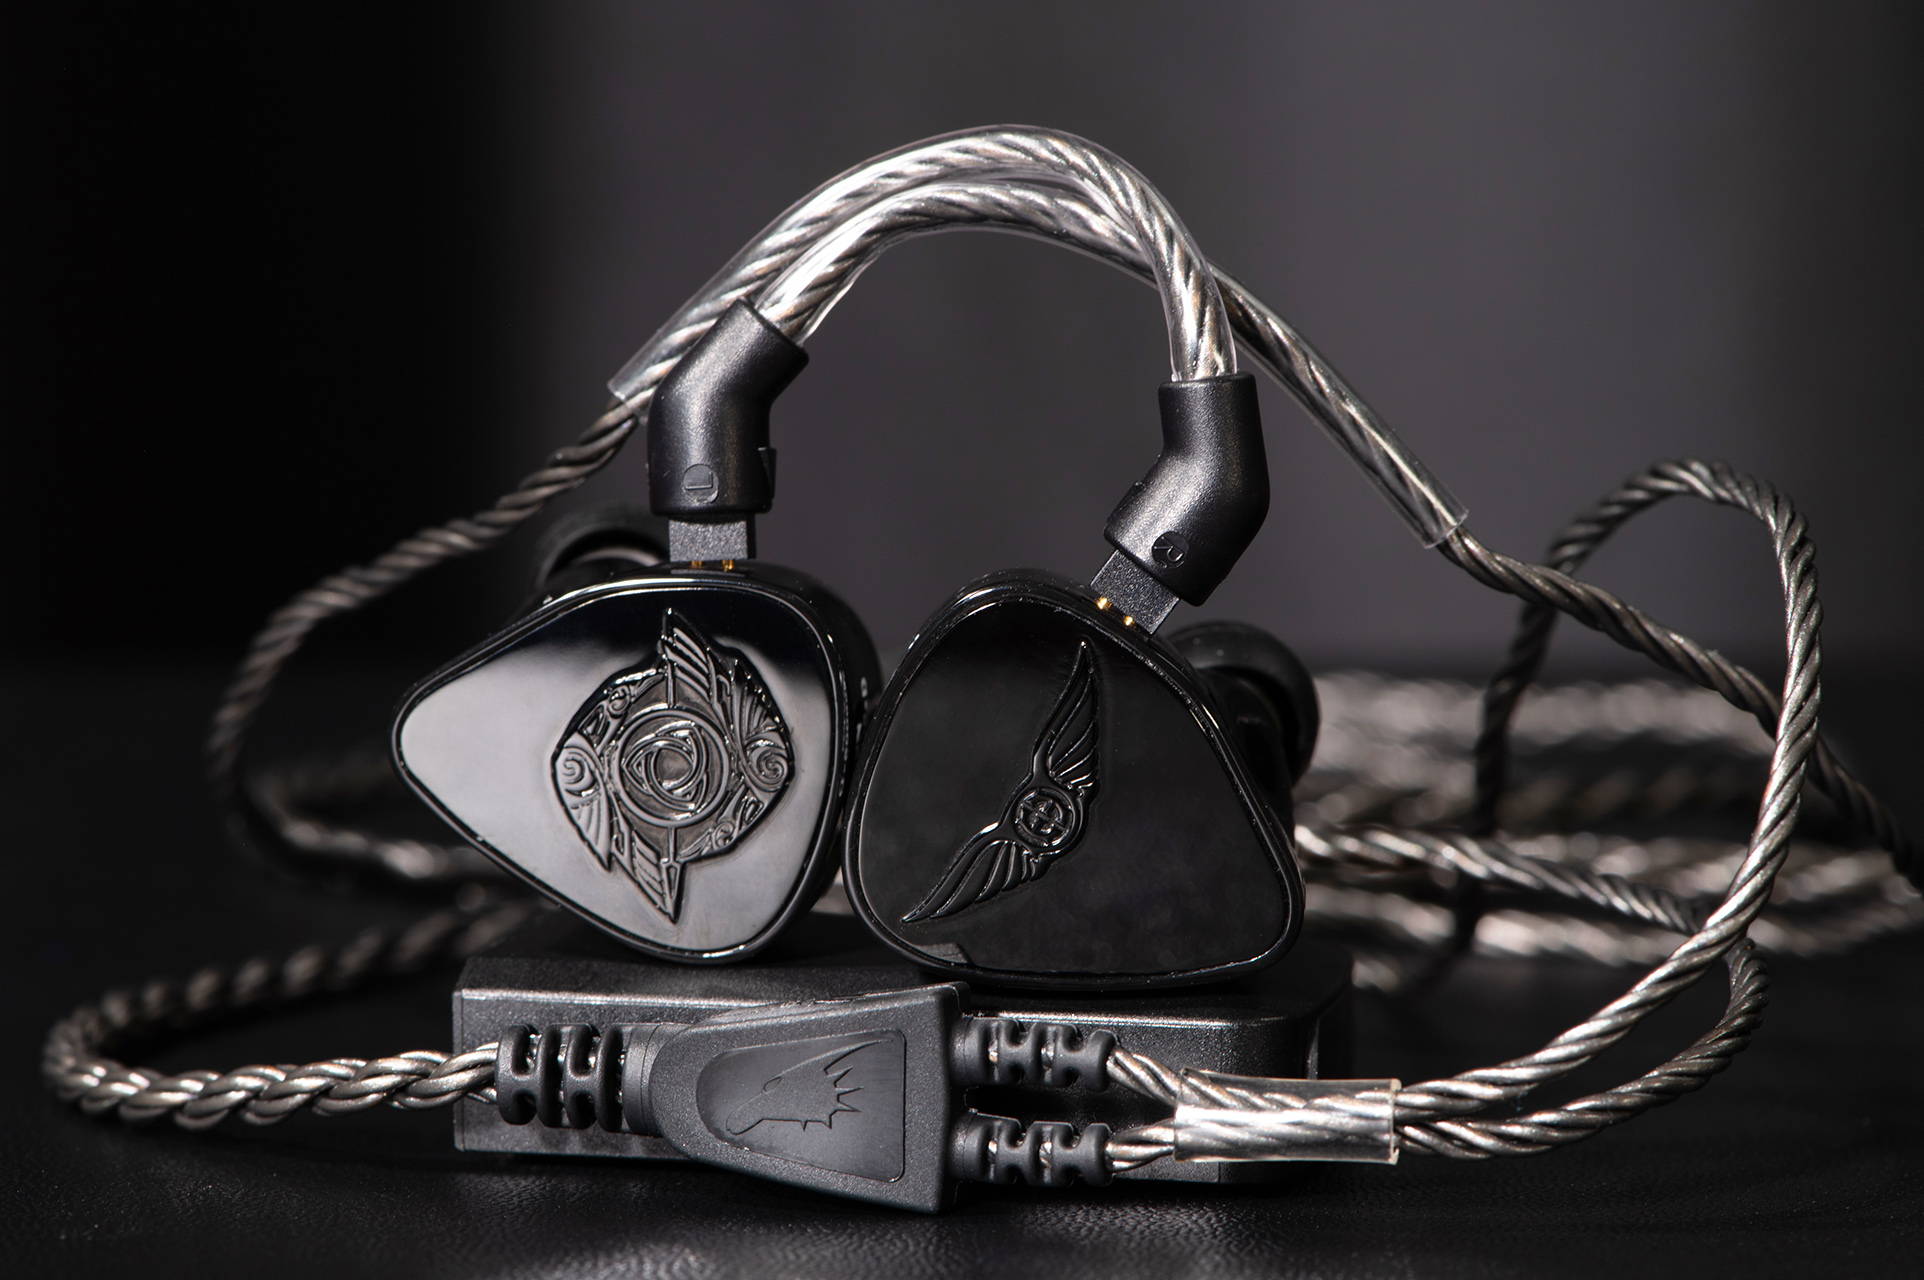 Empire Ears RAVEN IEM with Moon Audio Silver Dragon IEM V2 Cable